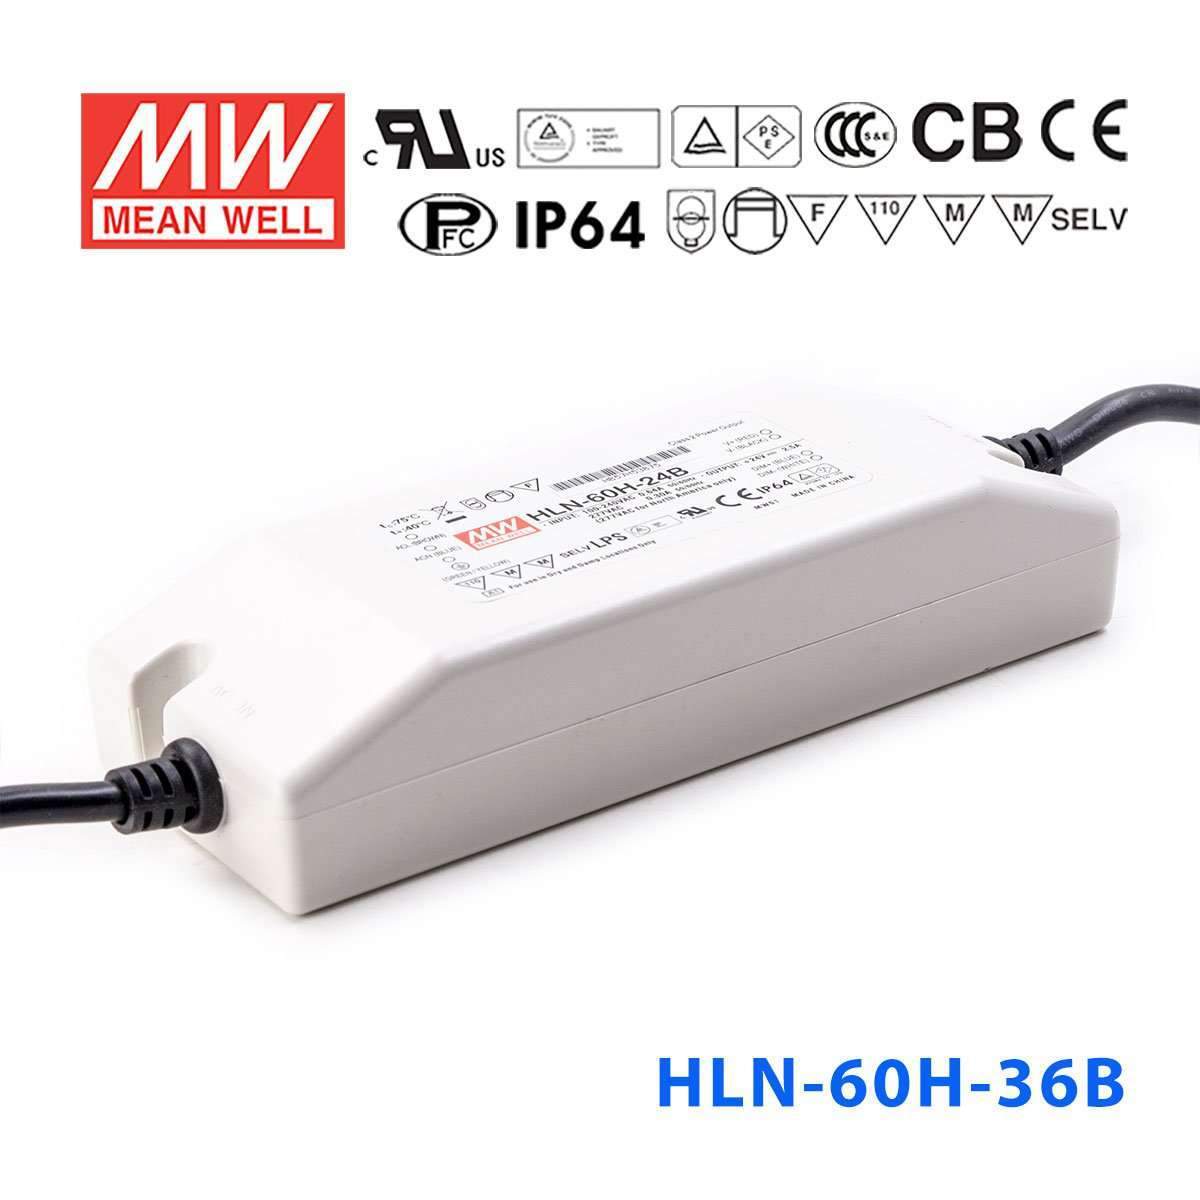 Mean Well HLN-60H-36B Power Supply 60W 36V - IP64, Dimmable